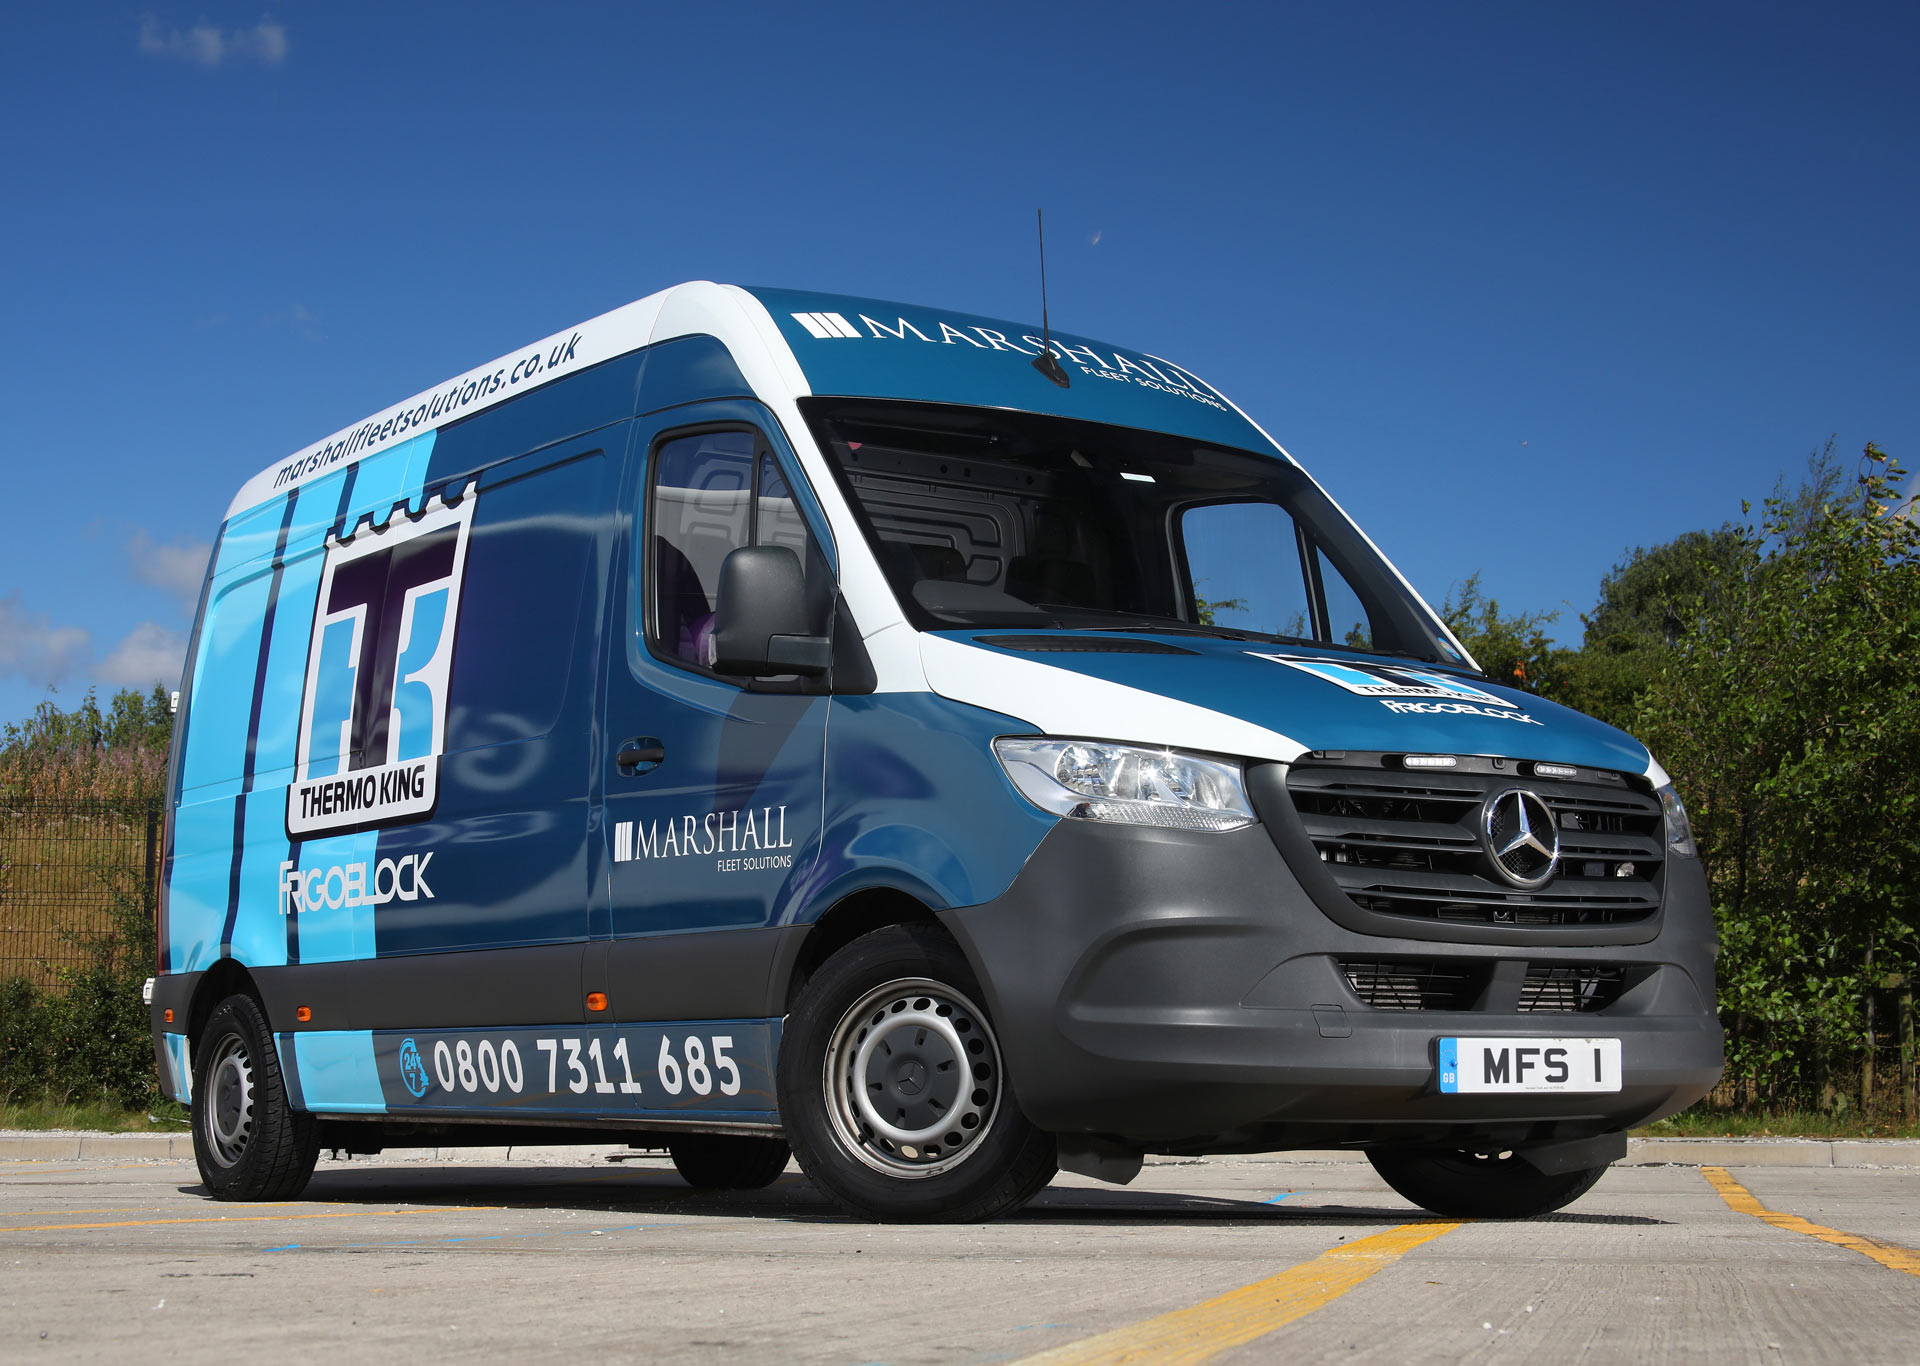 The UK’s largest independent commercial vehicle service organisation